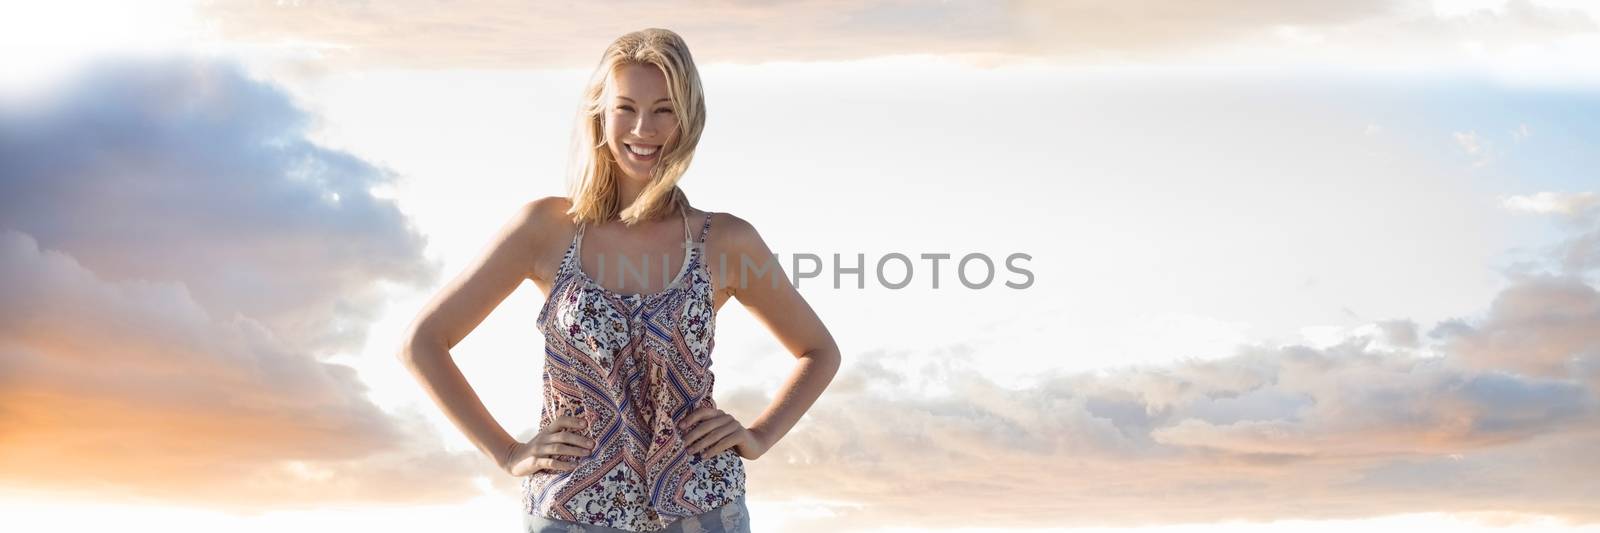 Digital composite of Woman in summer clothes with hands on hips against cloudy sky